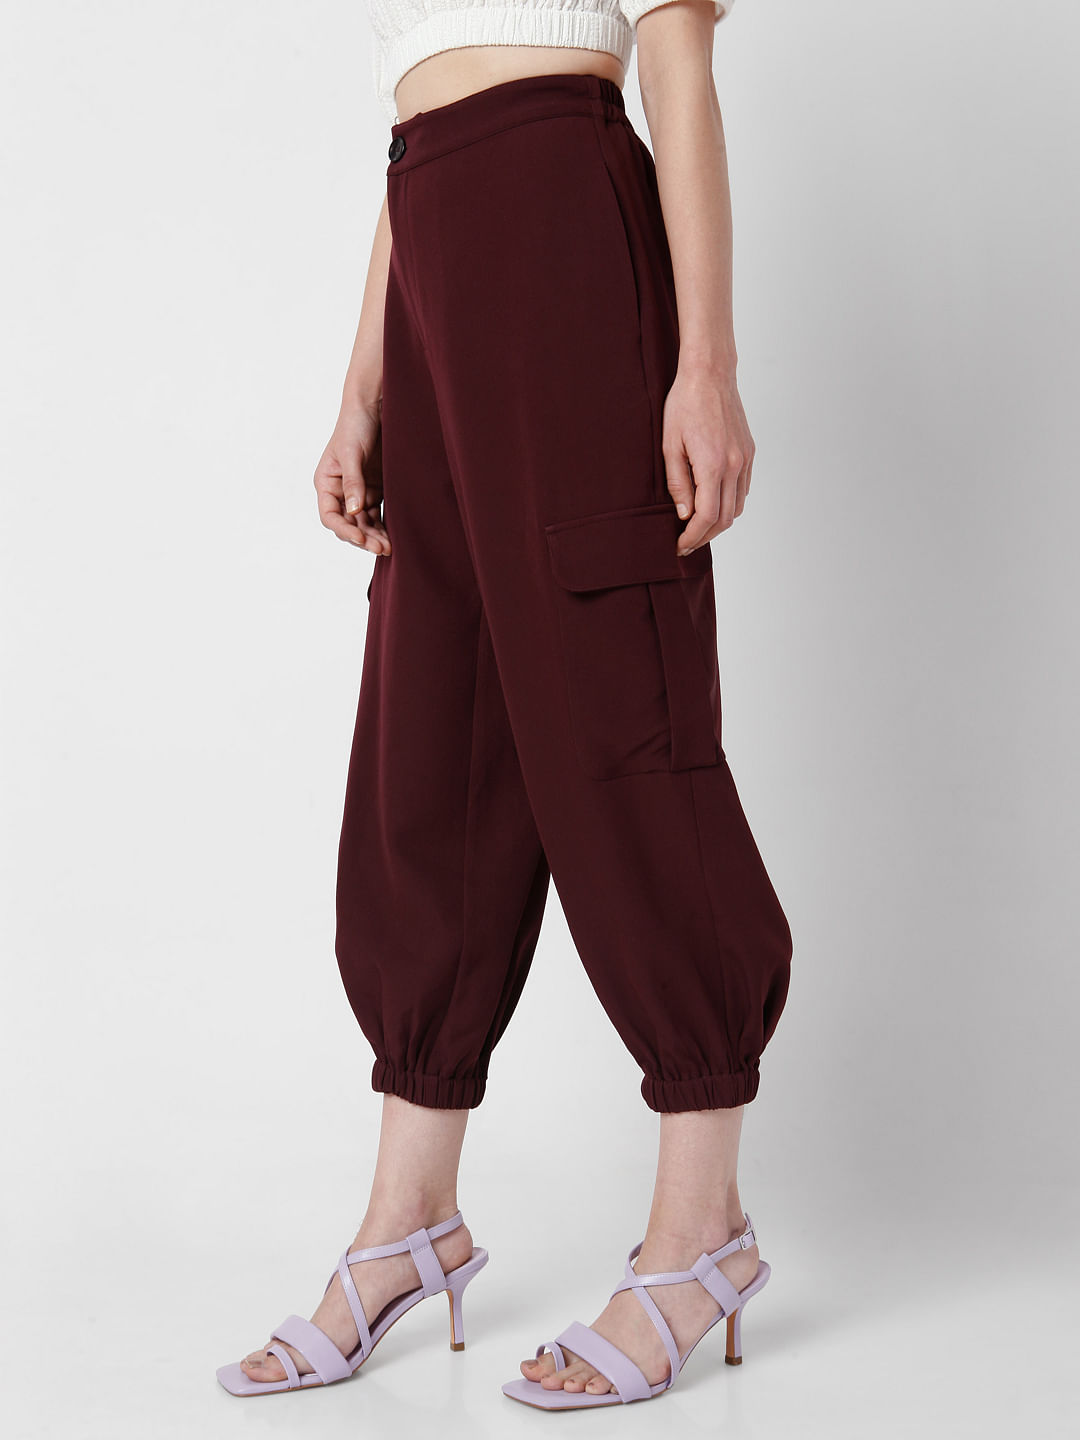 Shop latest Ash Baggy Cargo Pants Womens online – Marquee Industries  Private Limited